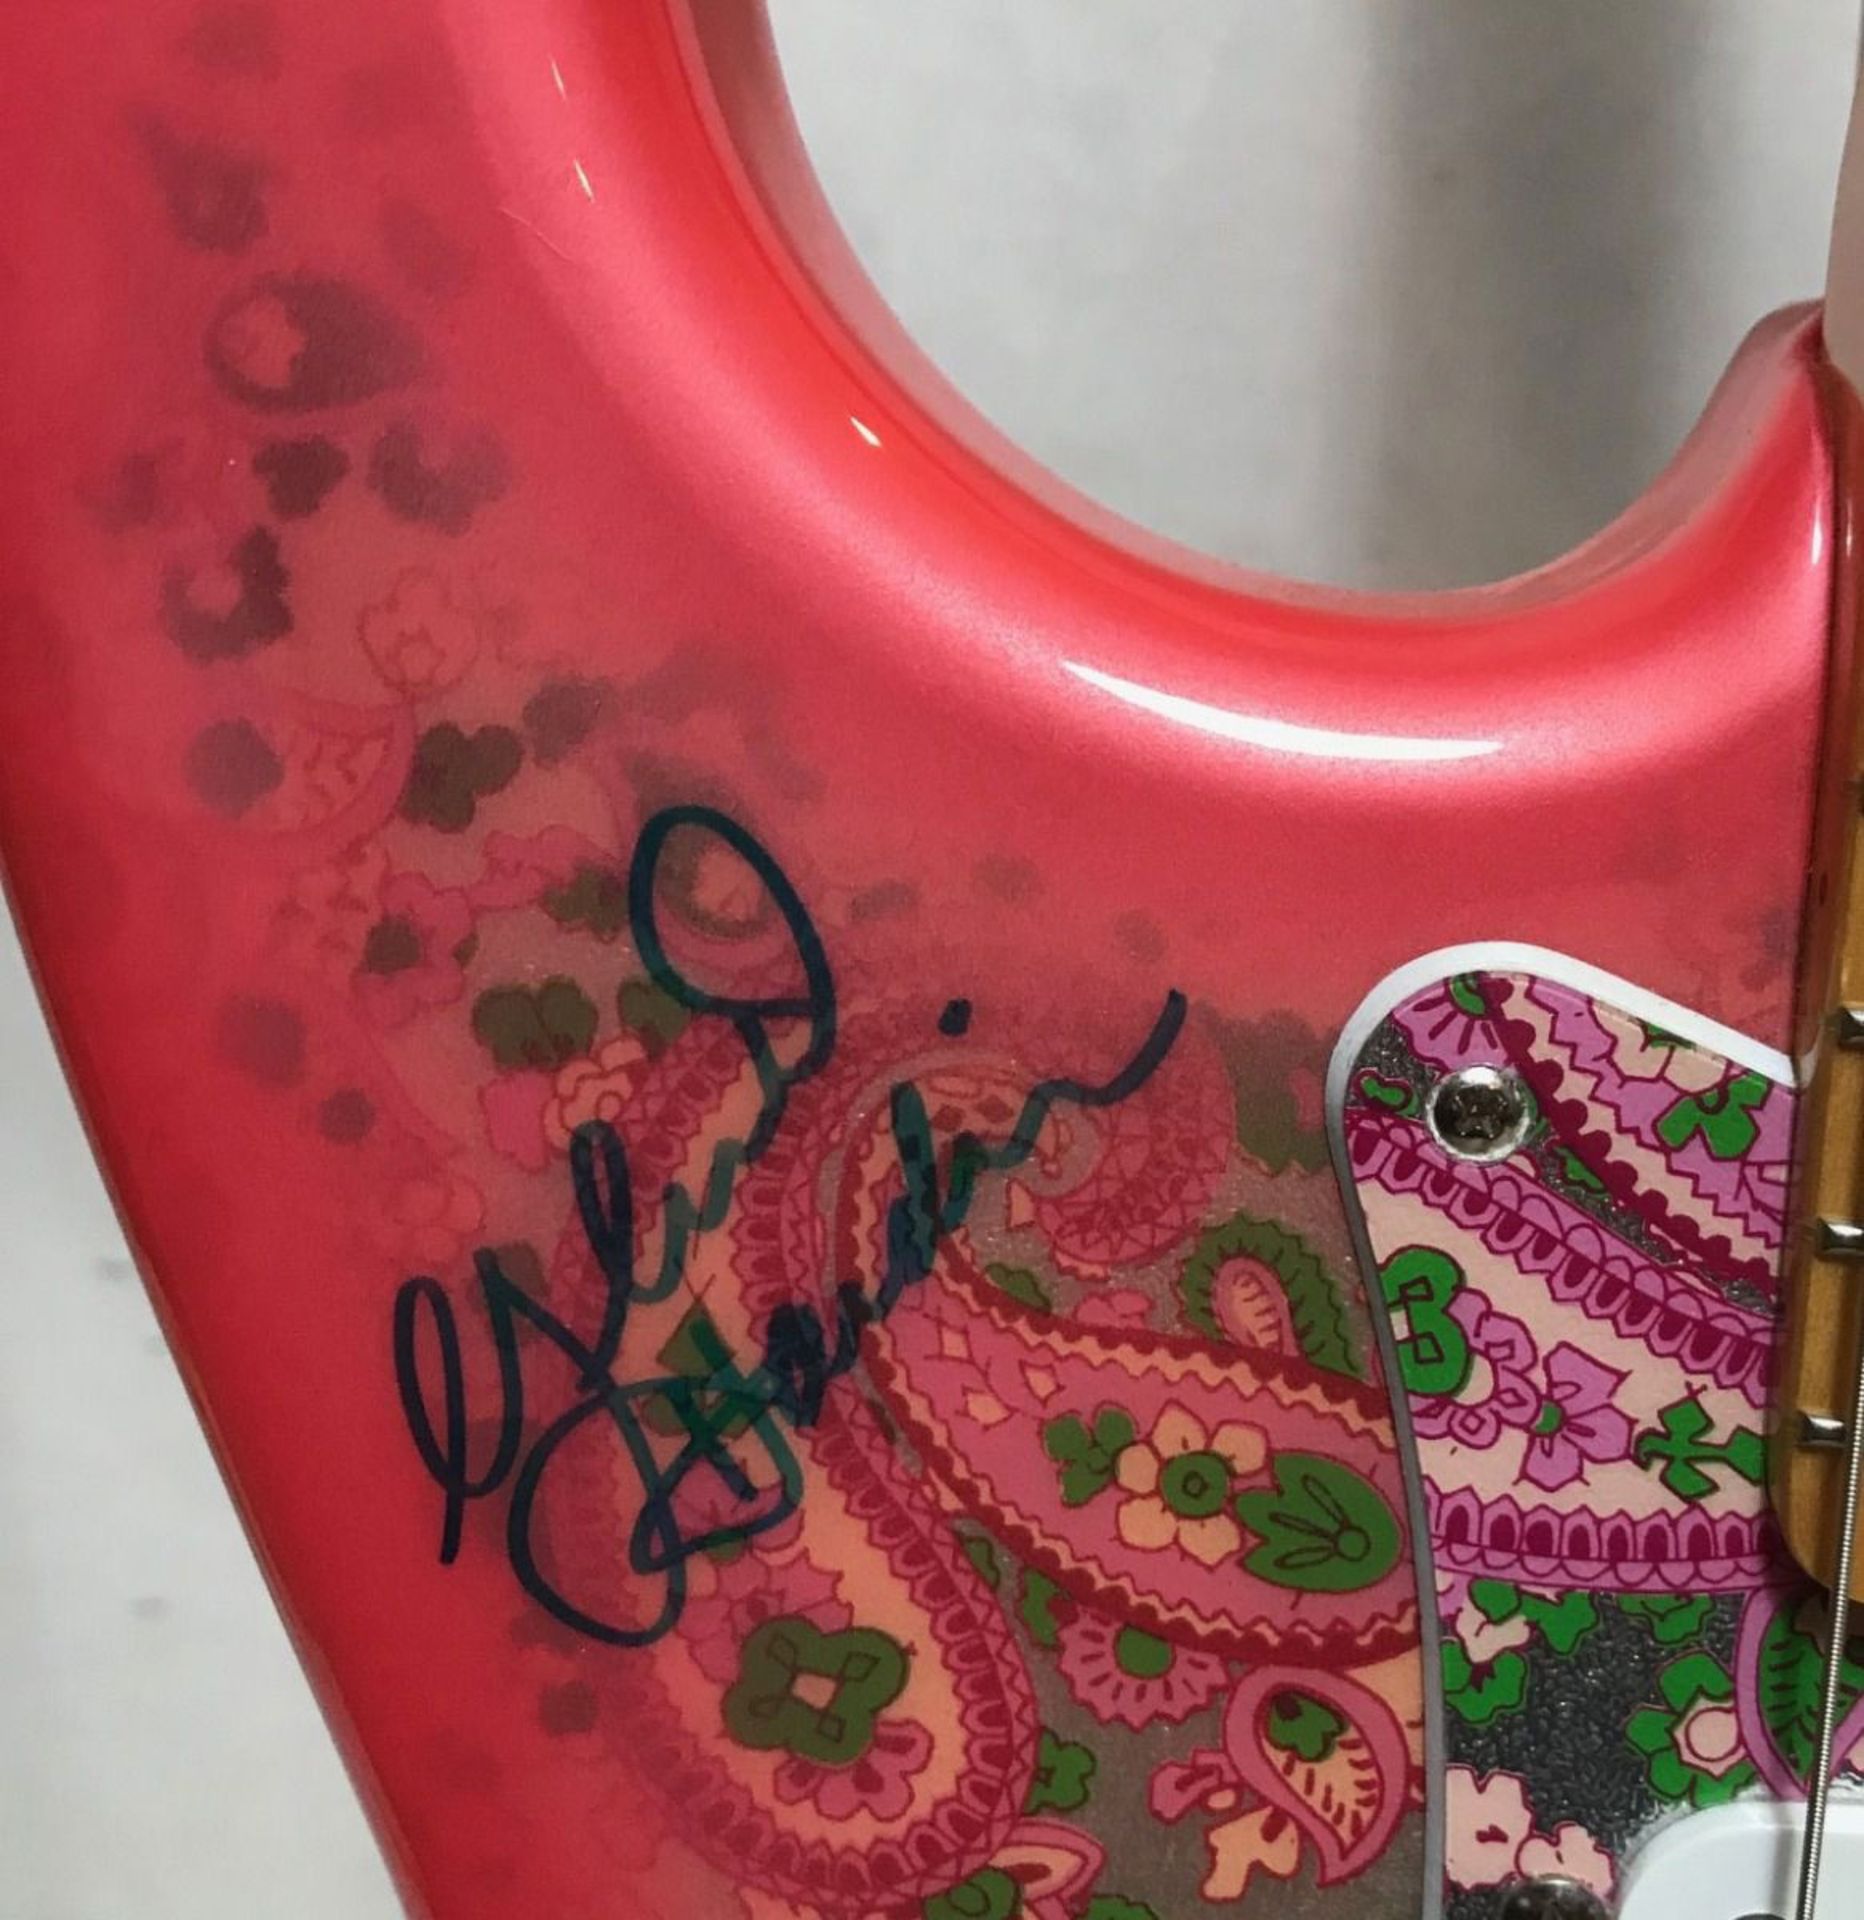 Fender Stratocaster Paisley Guitar Signed By Elvis Presley's Band Members - Image 4 of 8